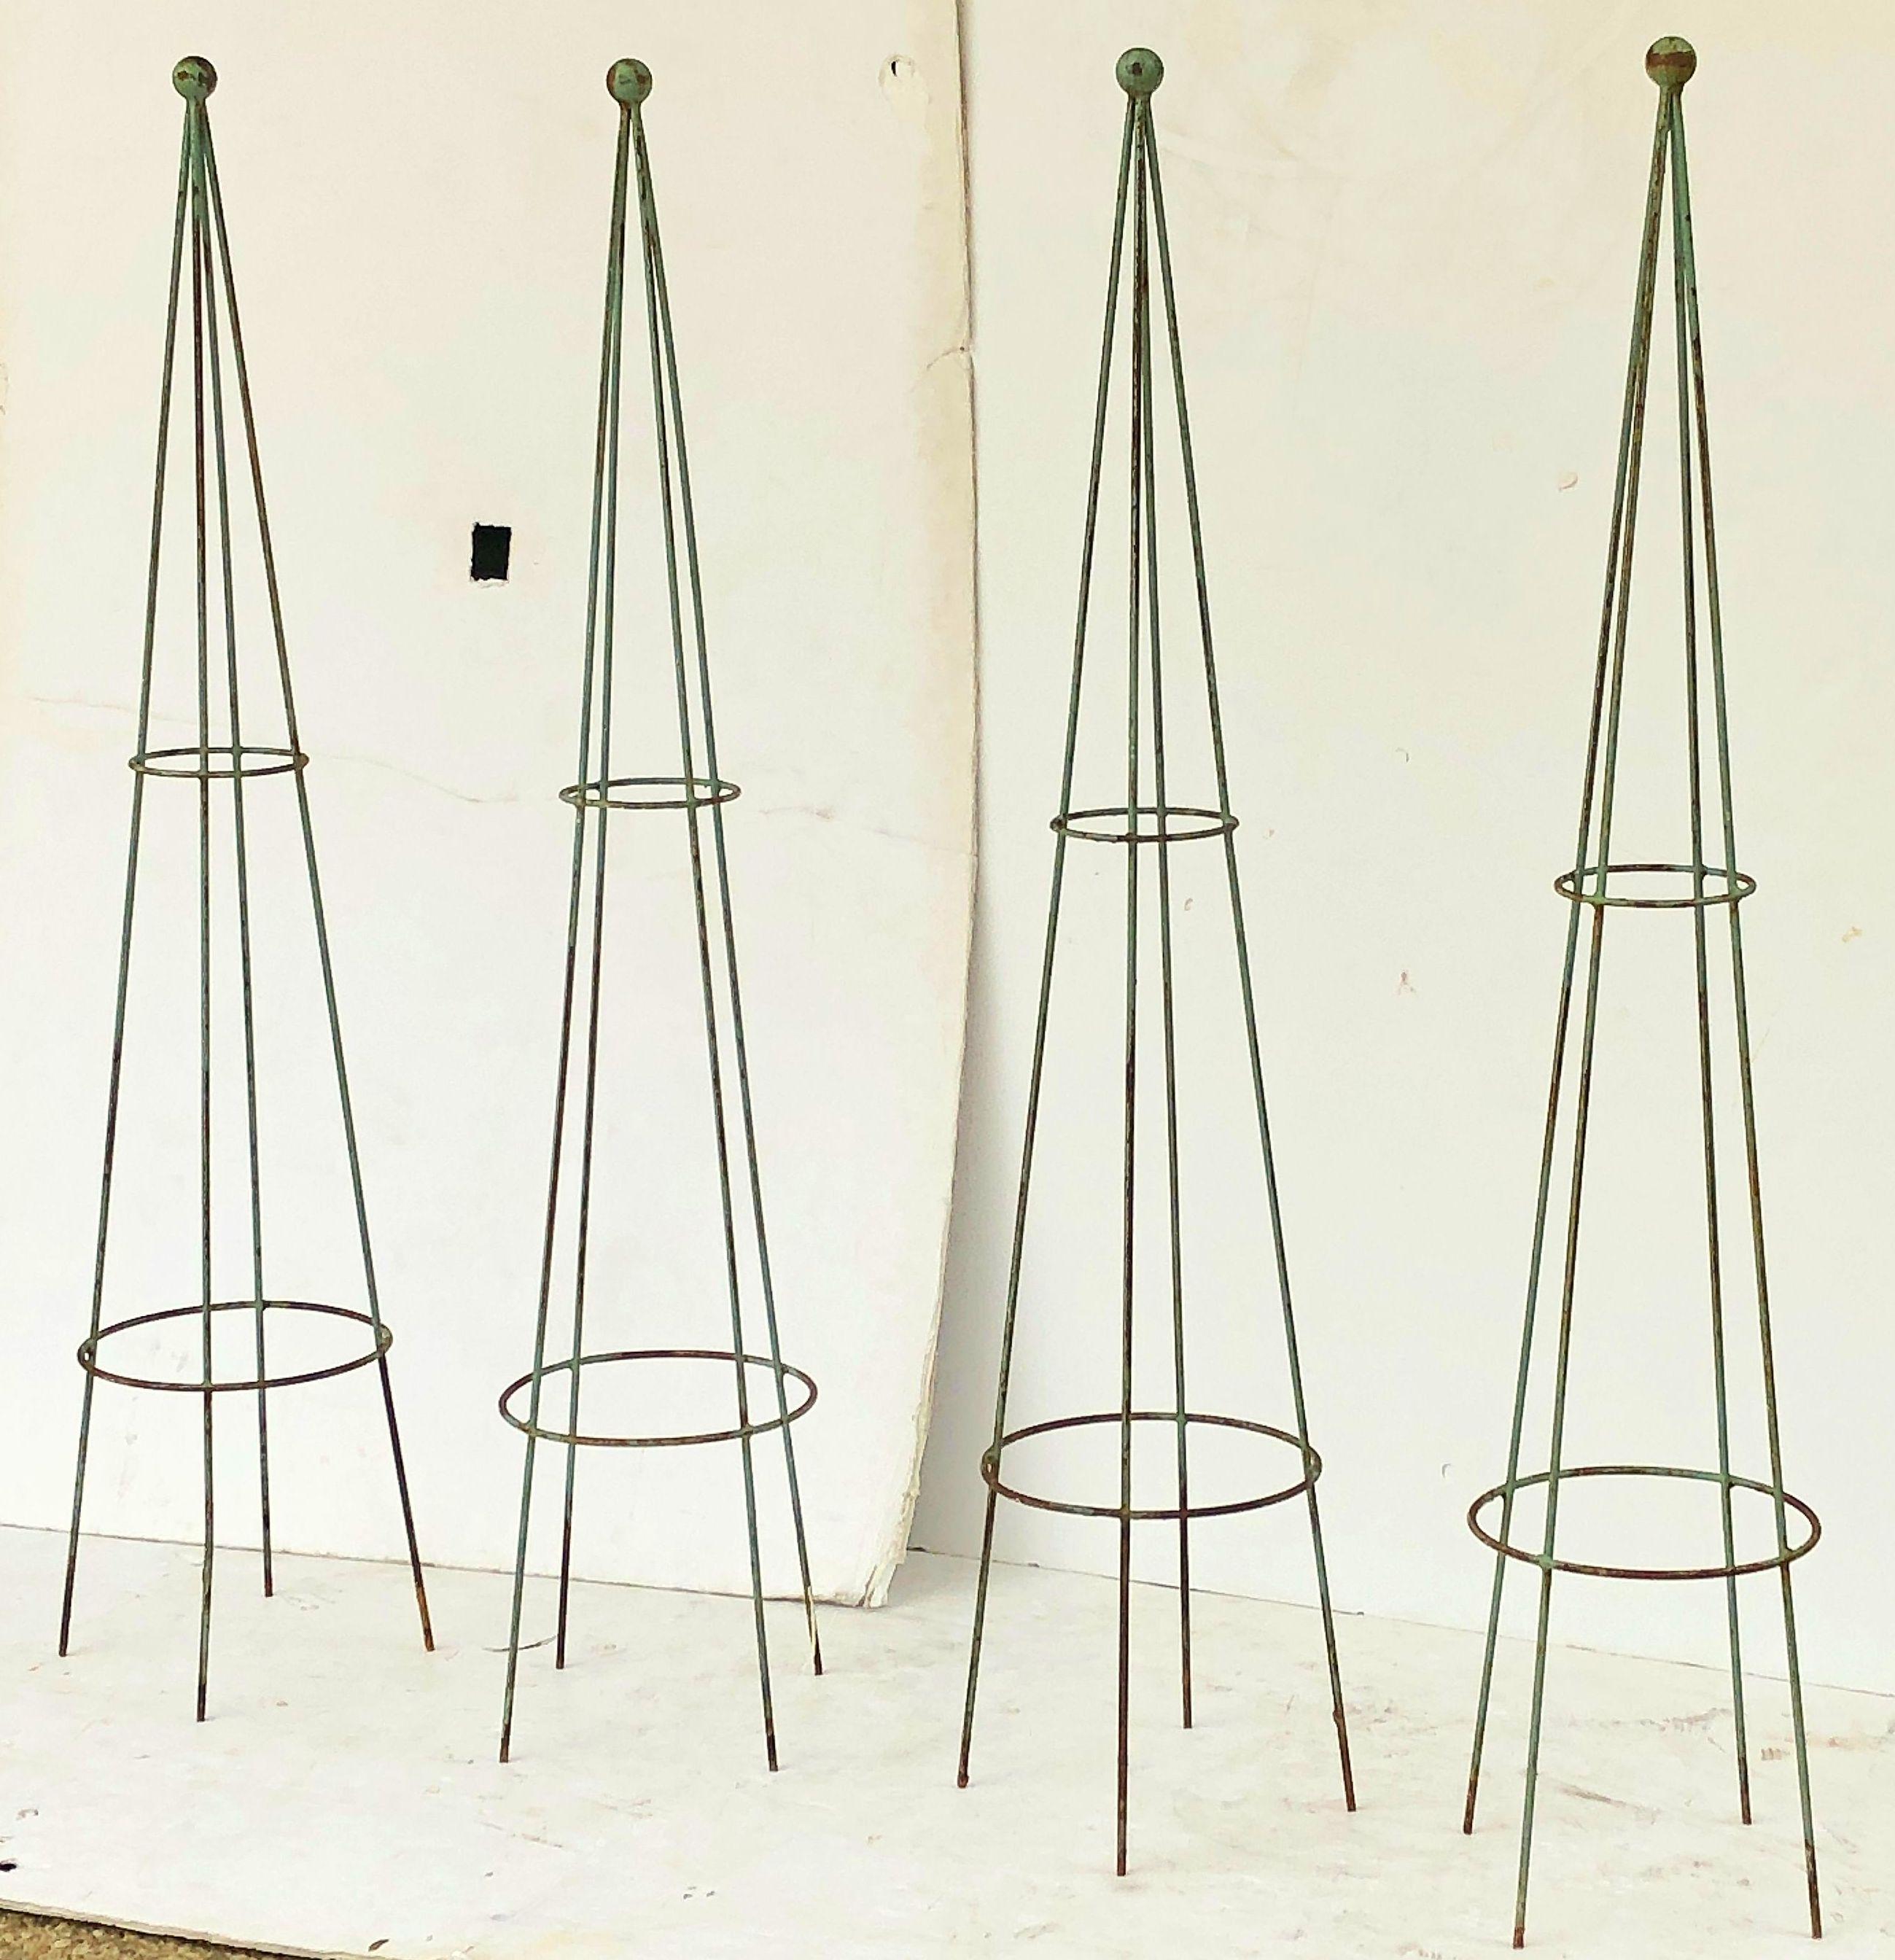 A set of English garden trellis obelisks of painted iron, each featuring a round finial top and four rods.

Measures: Height 60 1/2 inches x diameter 13 1/2 inches

Four available, individually priced, $895 each obelisk.